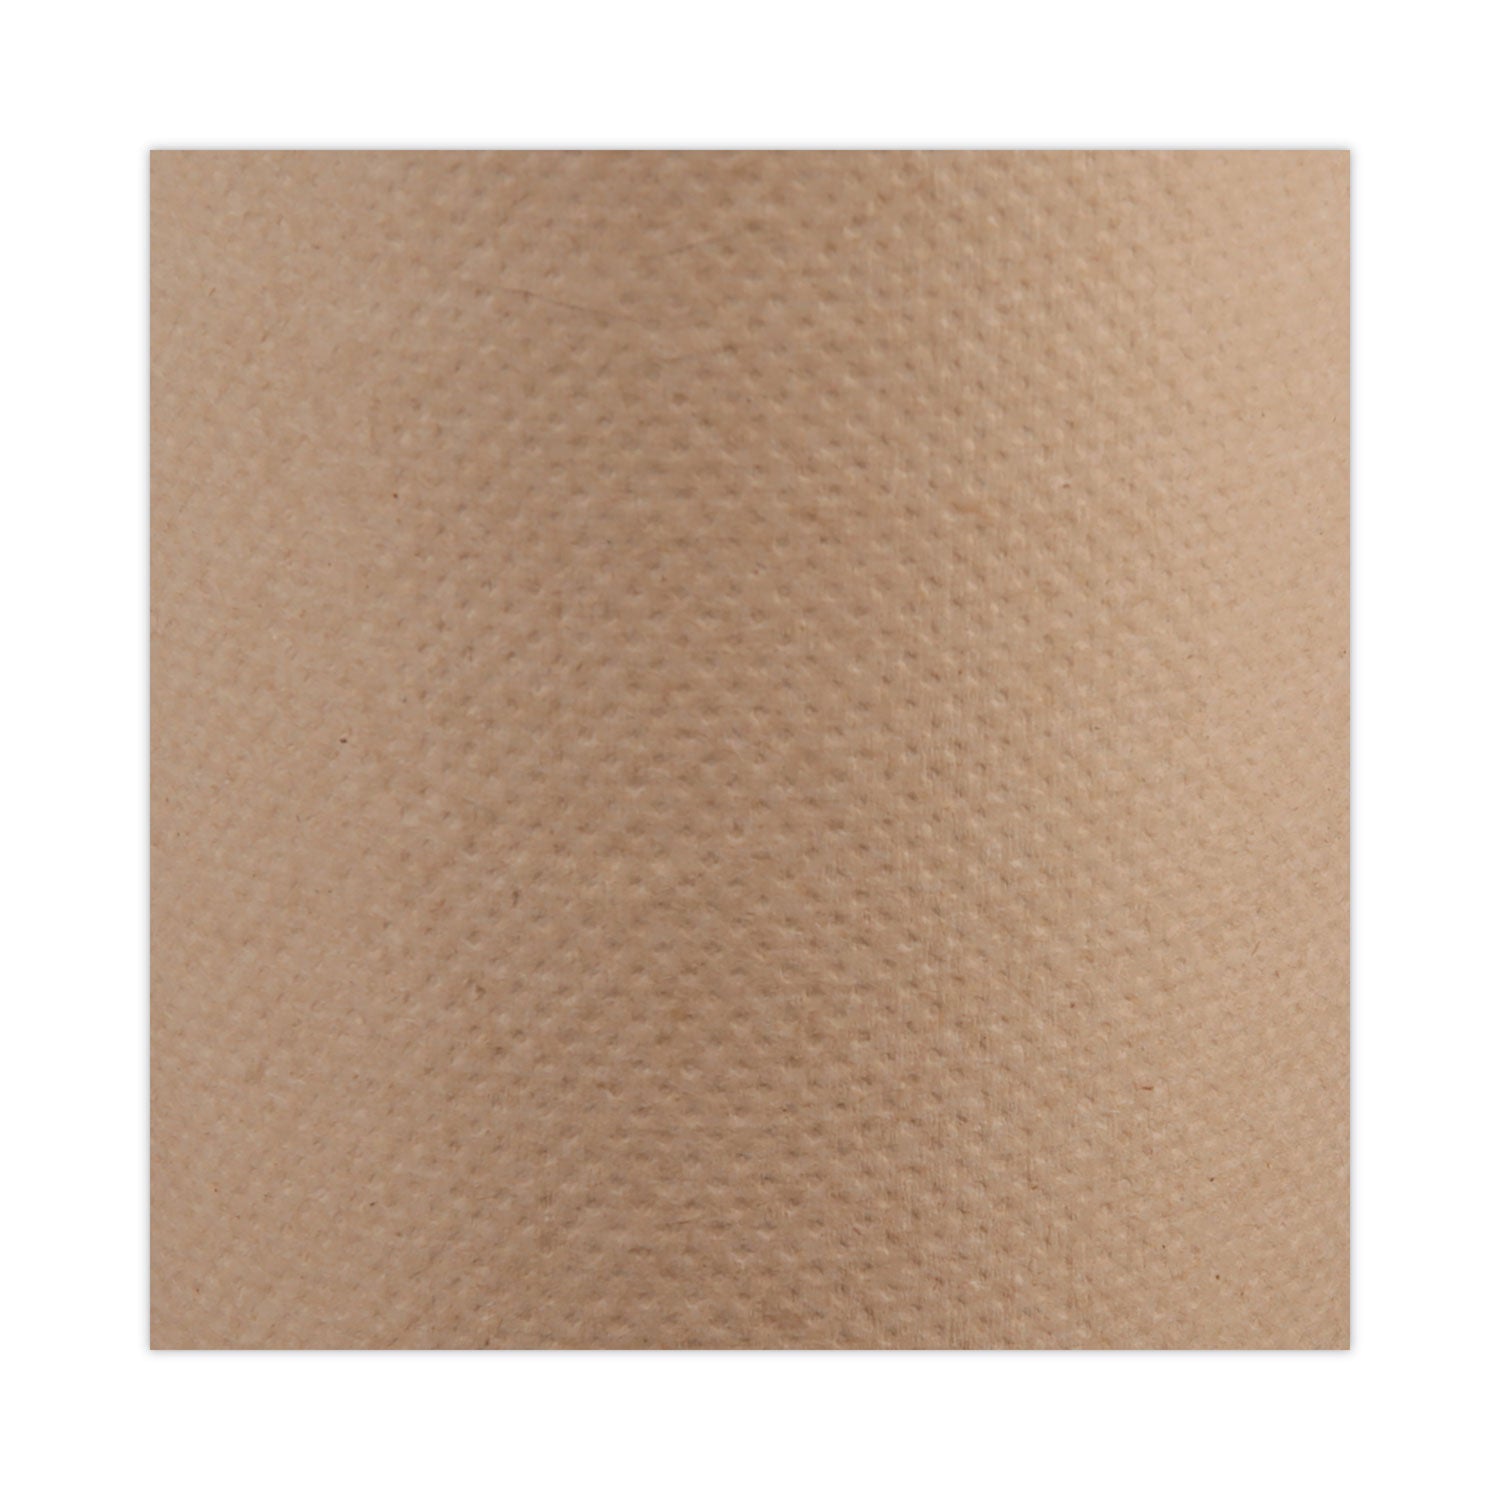 Hardwound Roll Towels, 1-Ply, 8" x 350 ft, Natural, 12 Rolls/Carton - 